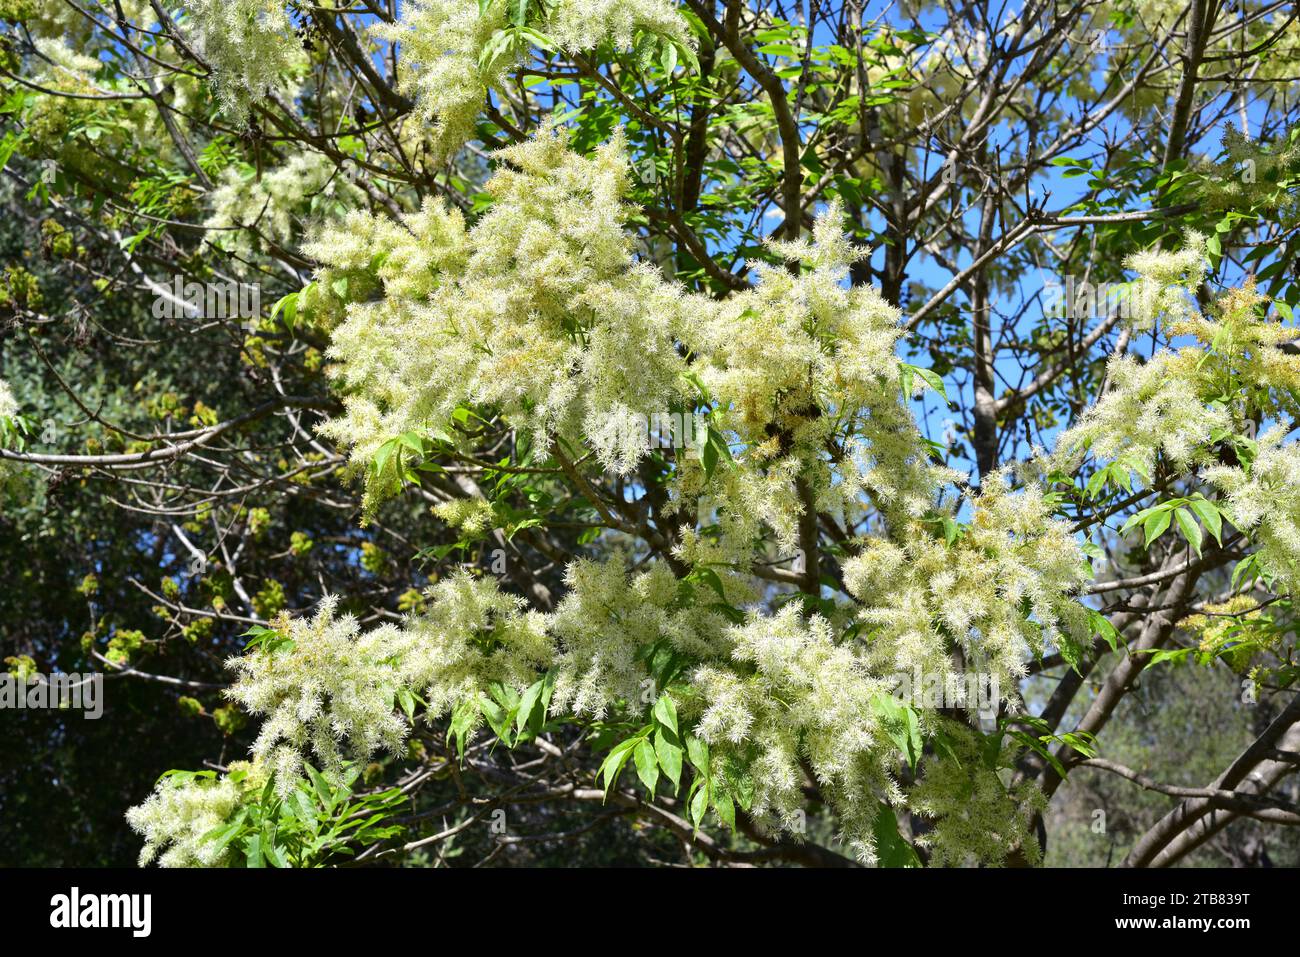 Manna ash (Fraxinus ornus) is a deciduous tree native to south Europe and southwest Asia. Inflorescences and leaves detail. Stock Photo